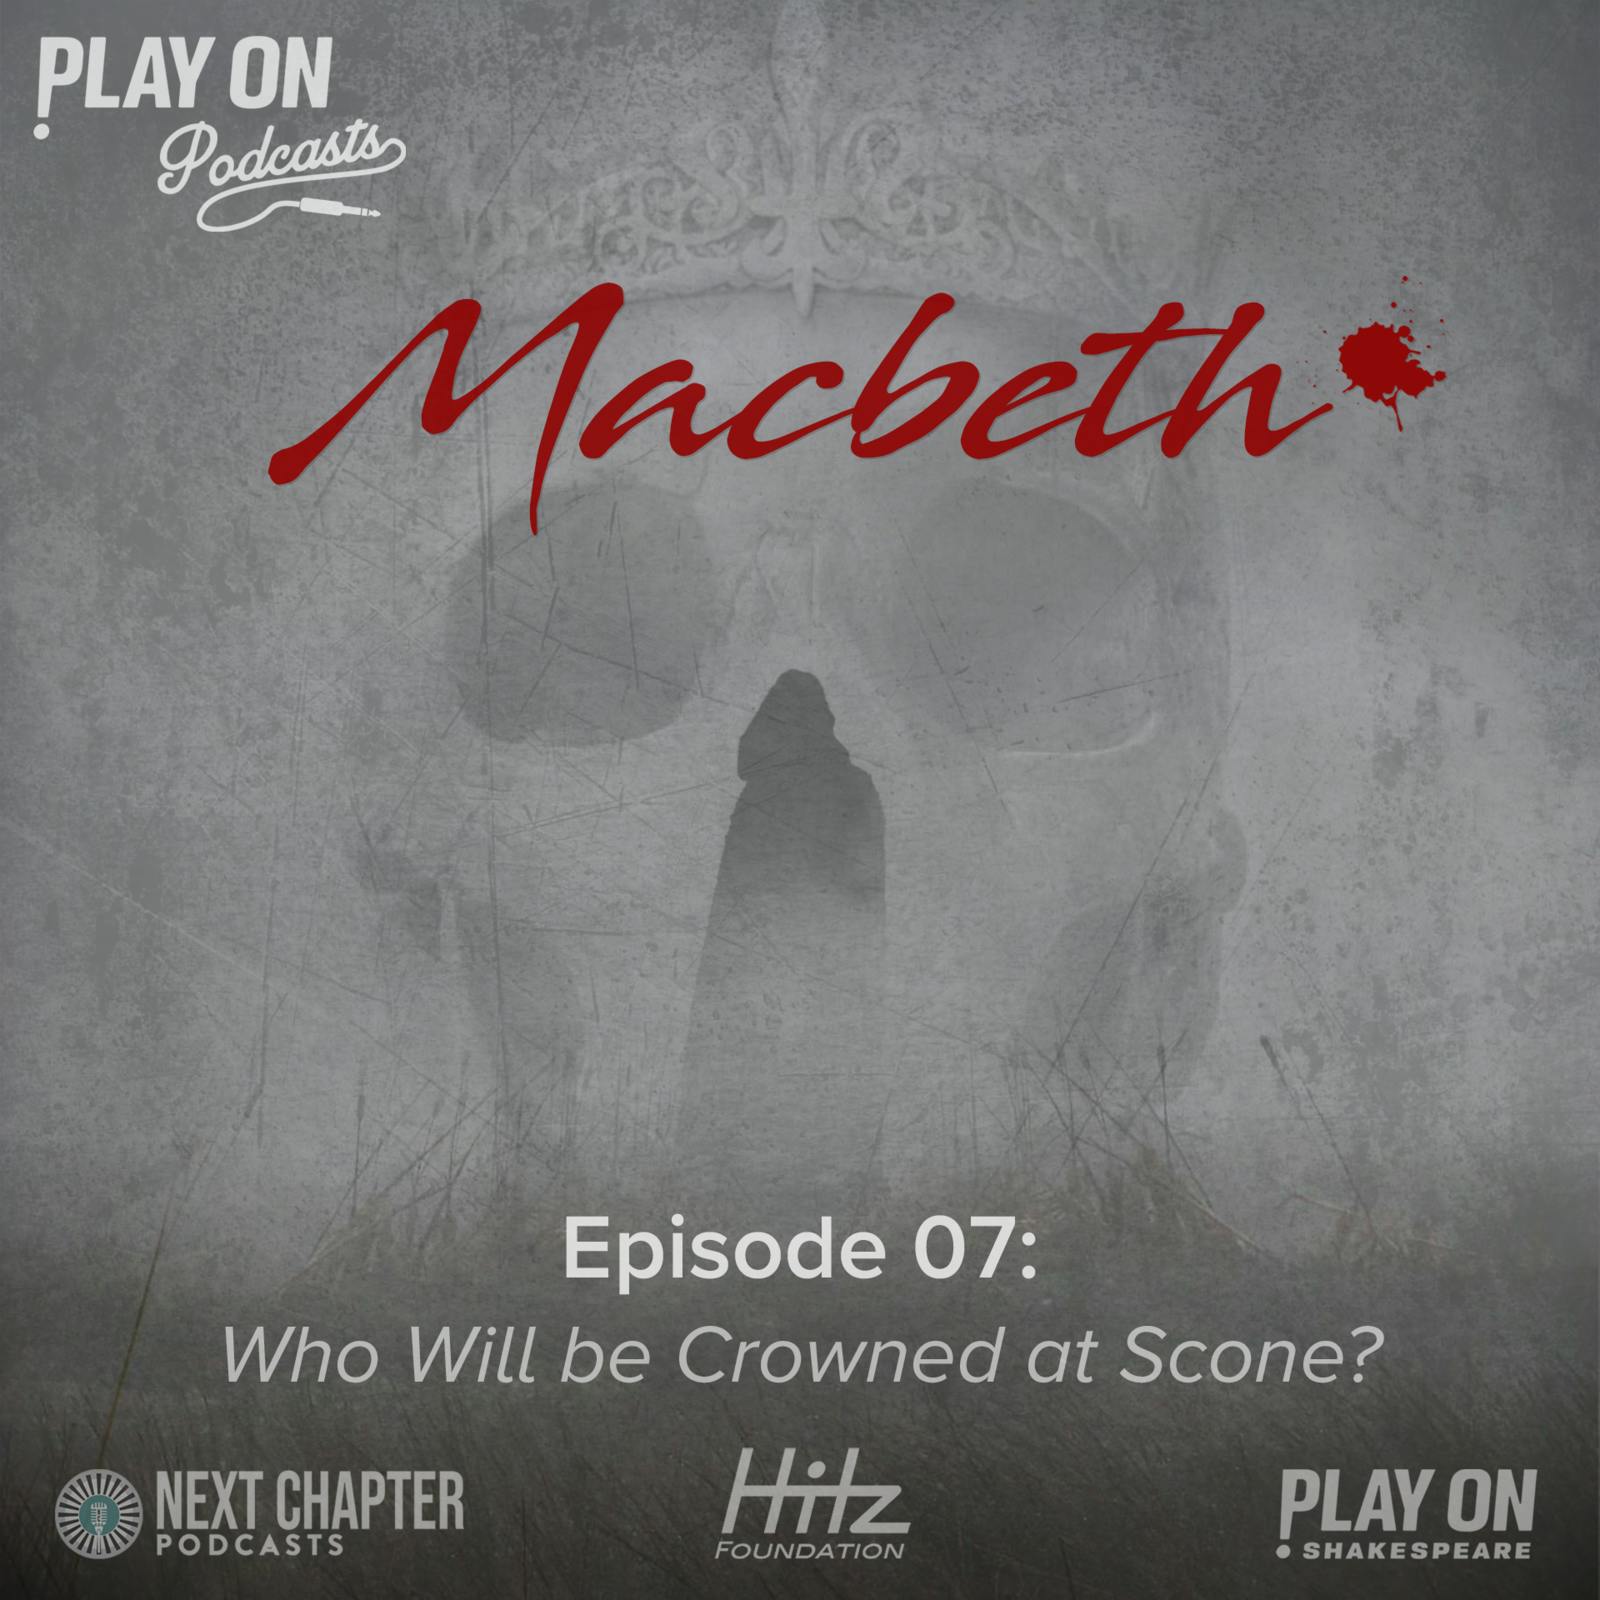 Macbeth - Episode 7 - Who Will be Crowned at Scone?